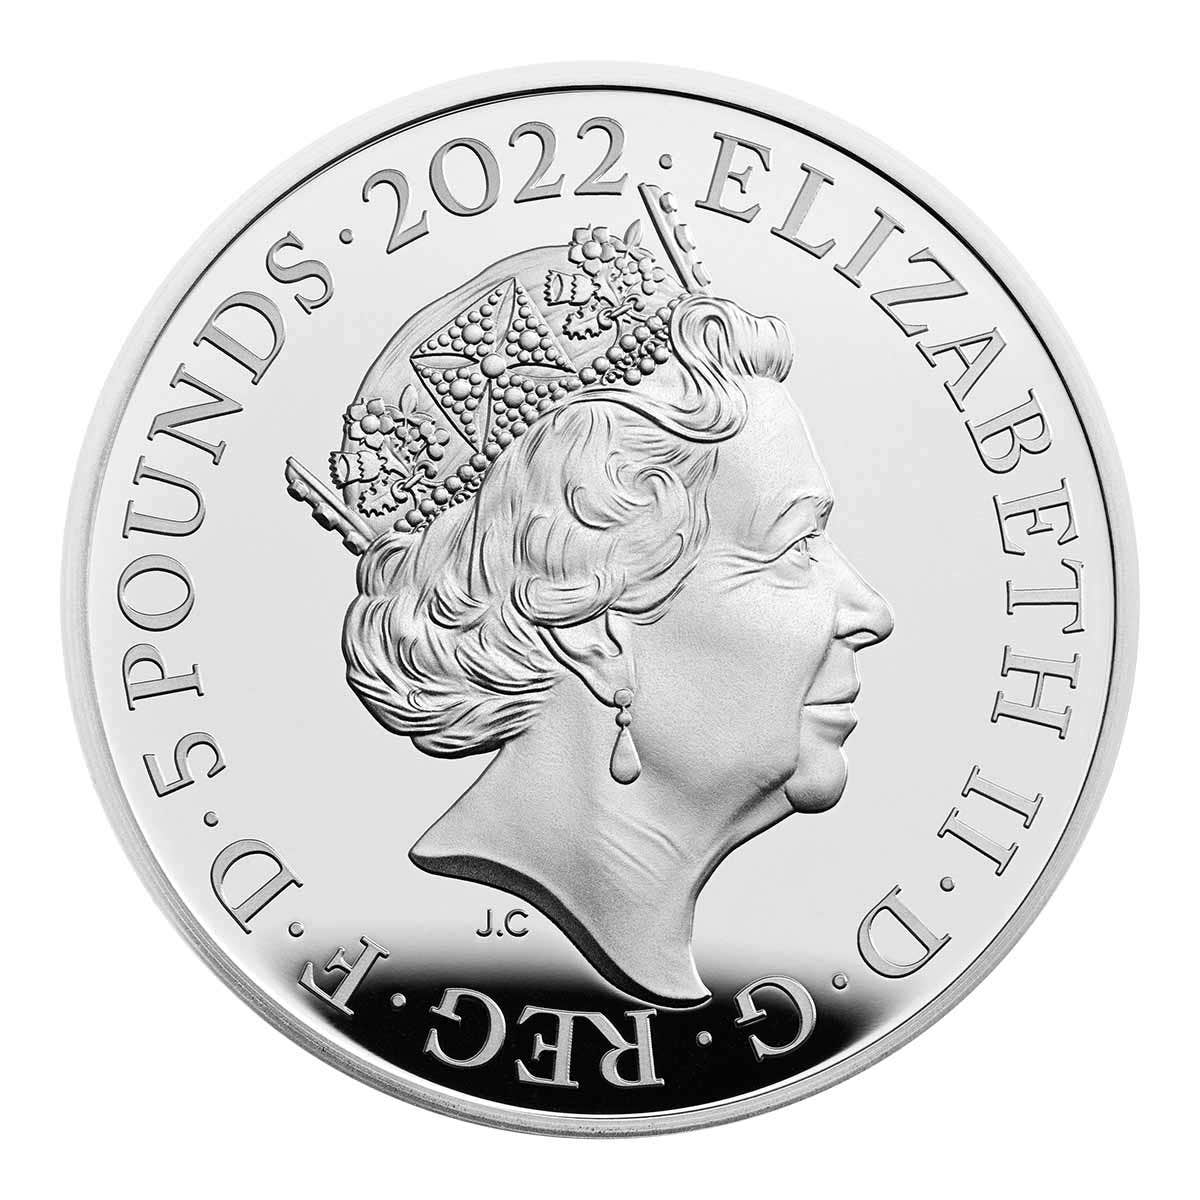 The Queen's Reign Charity and Patronage 2022 £5 Silver Proof Coin